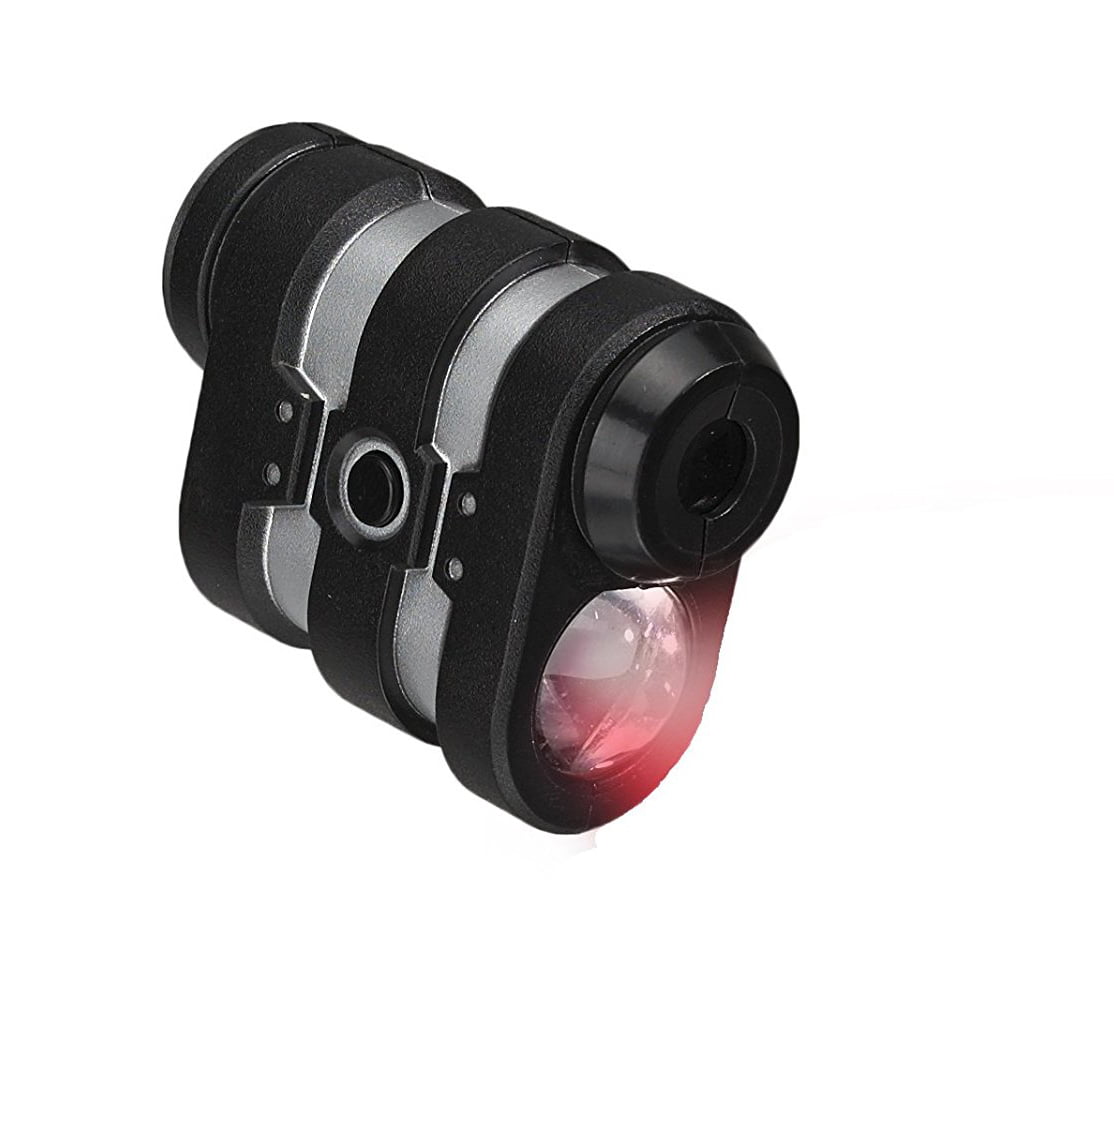 Be The Ultimate Spy See Up To 50 Feet Away In The Dark SpyX Night Hawk Scope 